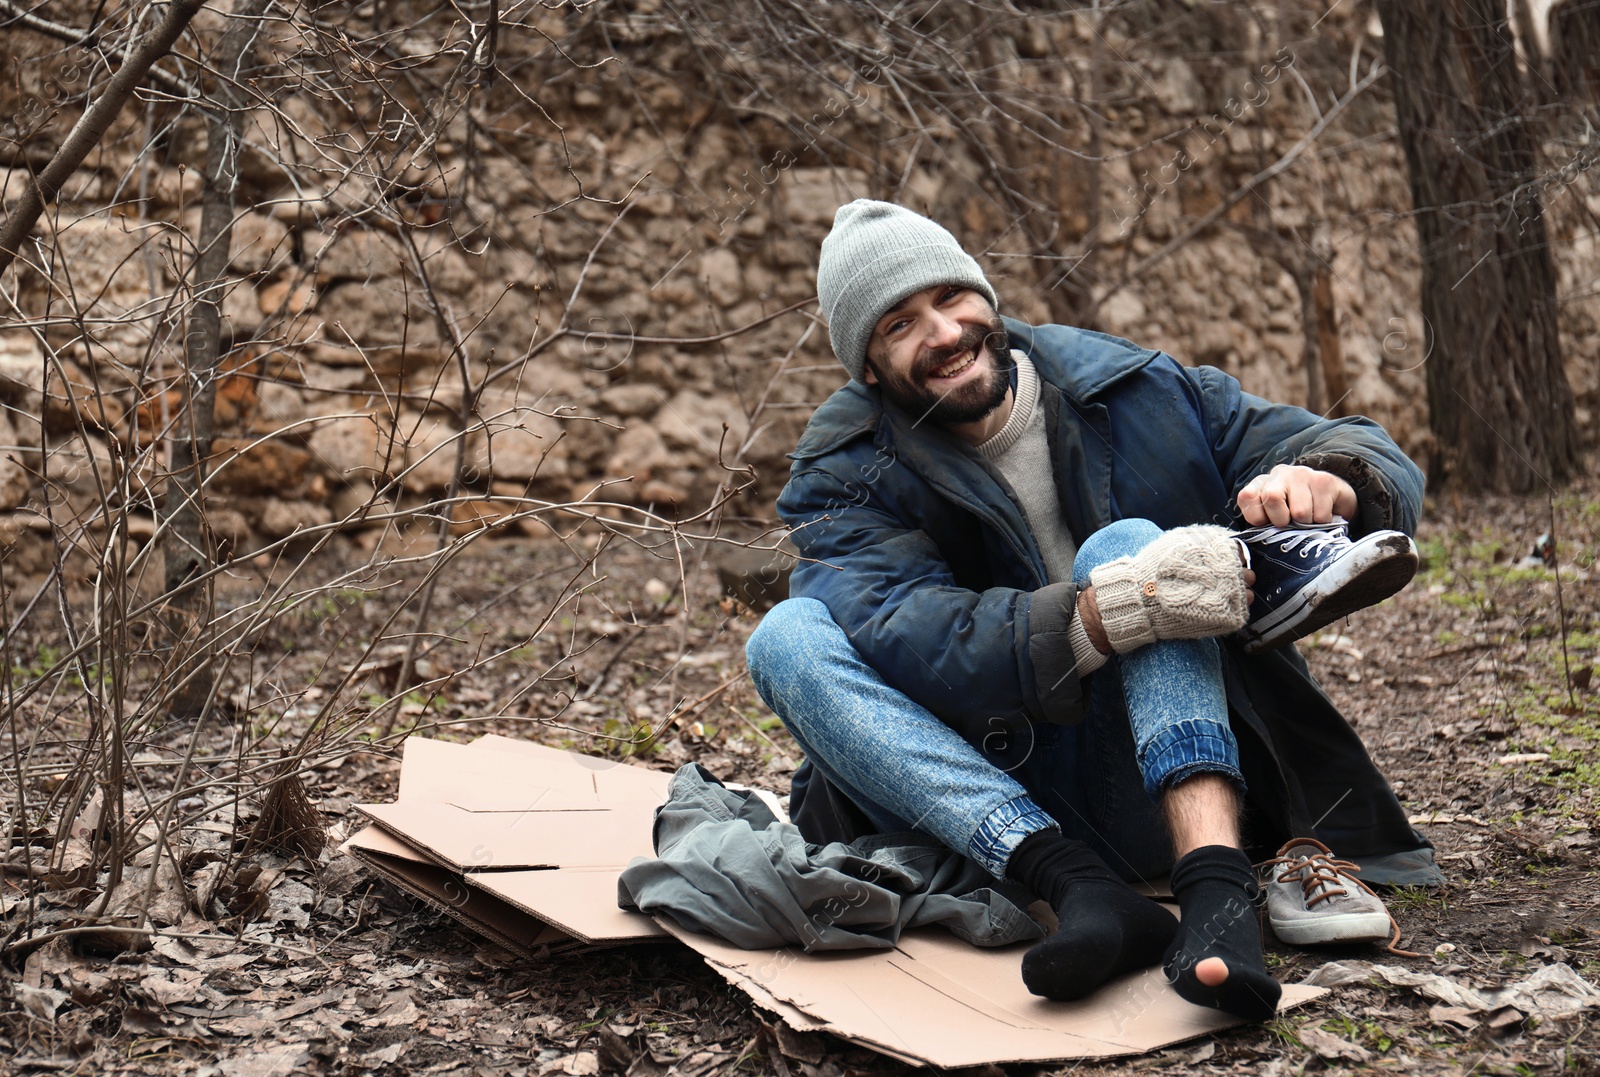 Photo of Poor homeless man sitting on cardboard in city park